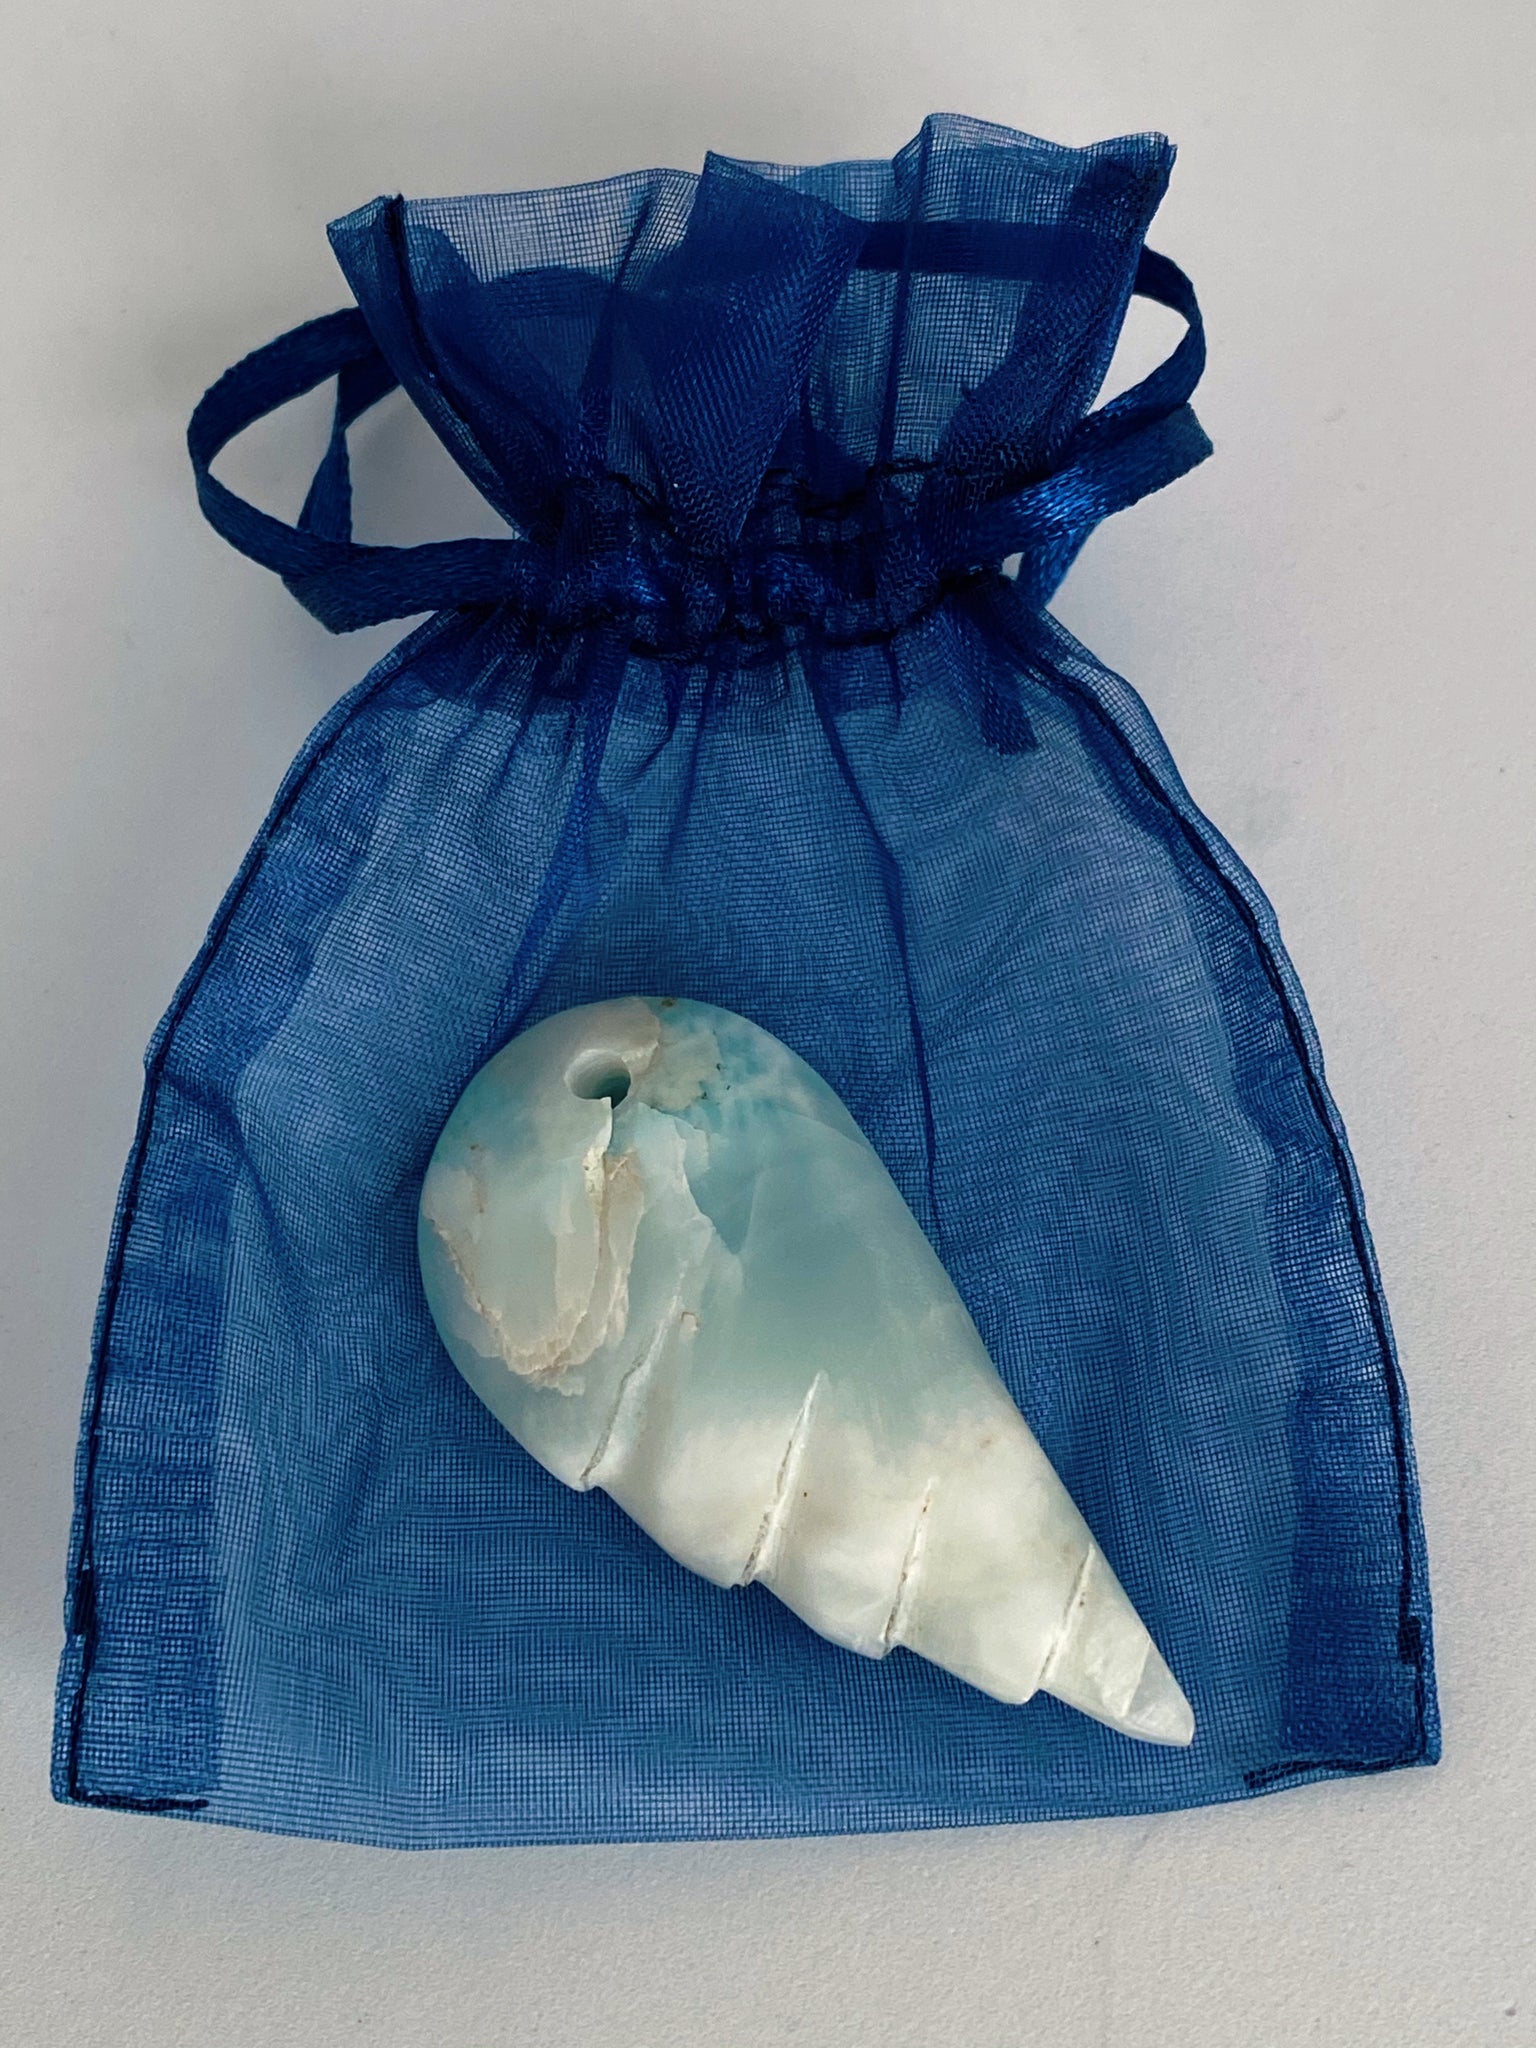 LARIMAR WINGS for Jewelry or meditation